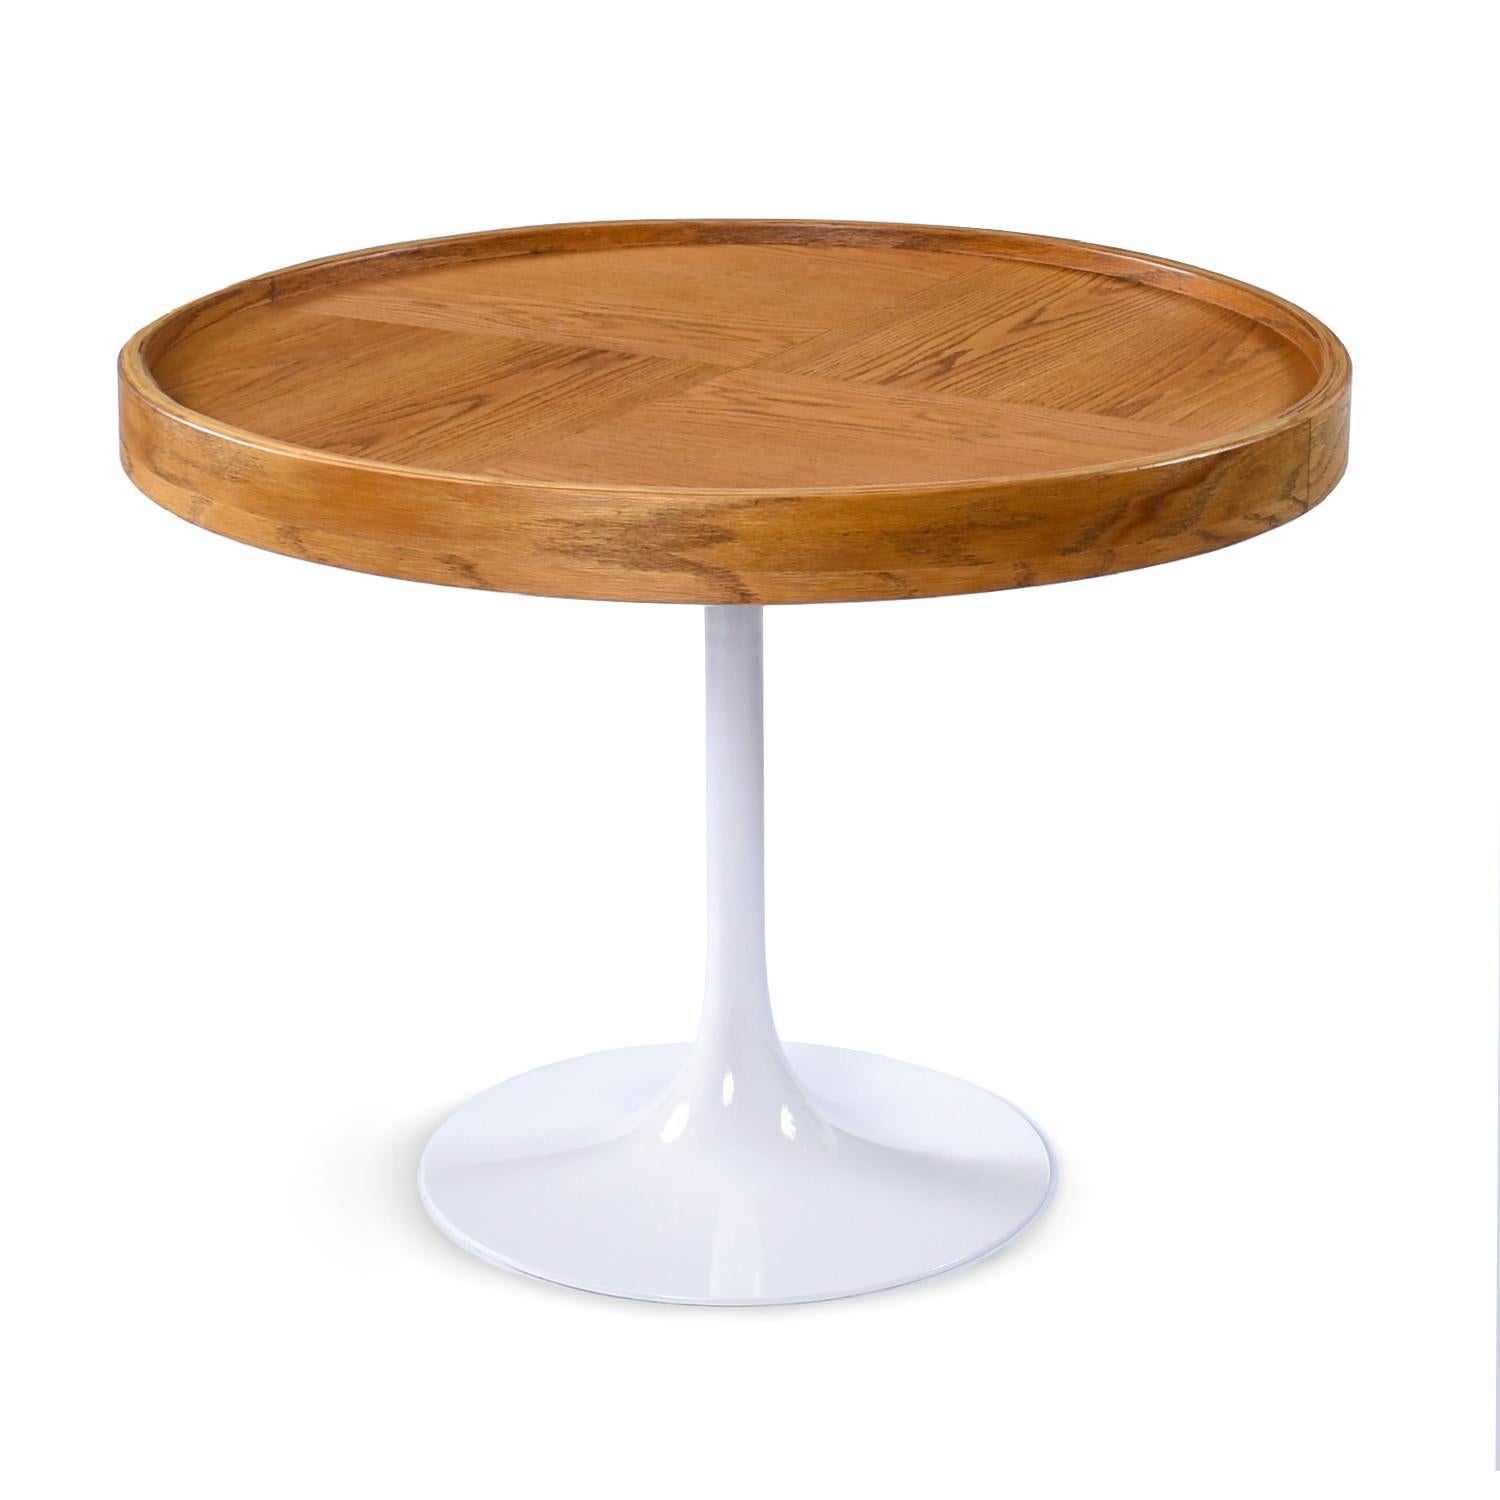 Restored Mid-Century Modern Oak Top Round Tulip Table Dining or Gaming Table For Sale